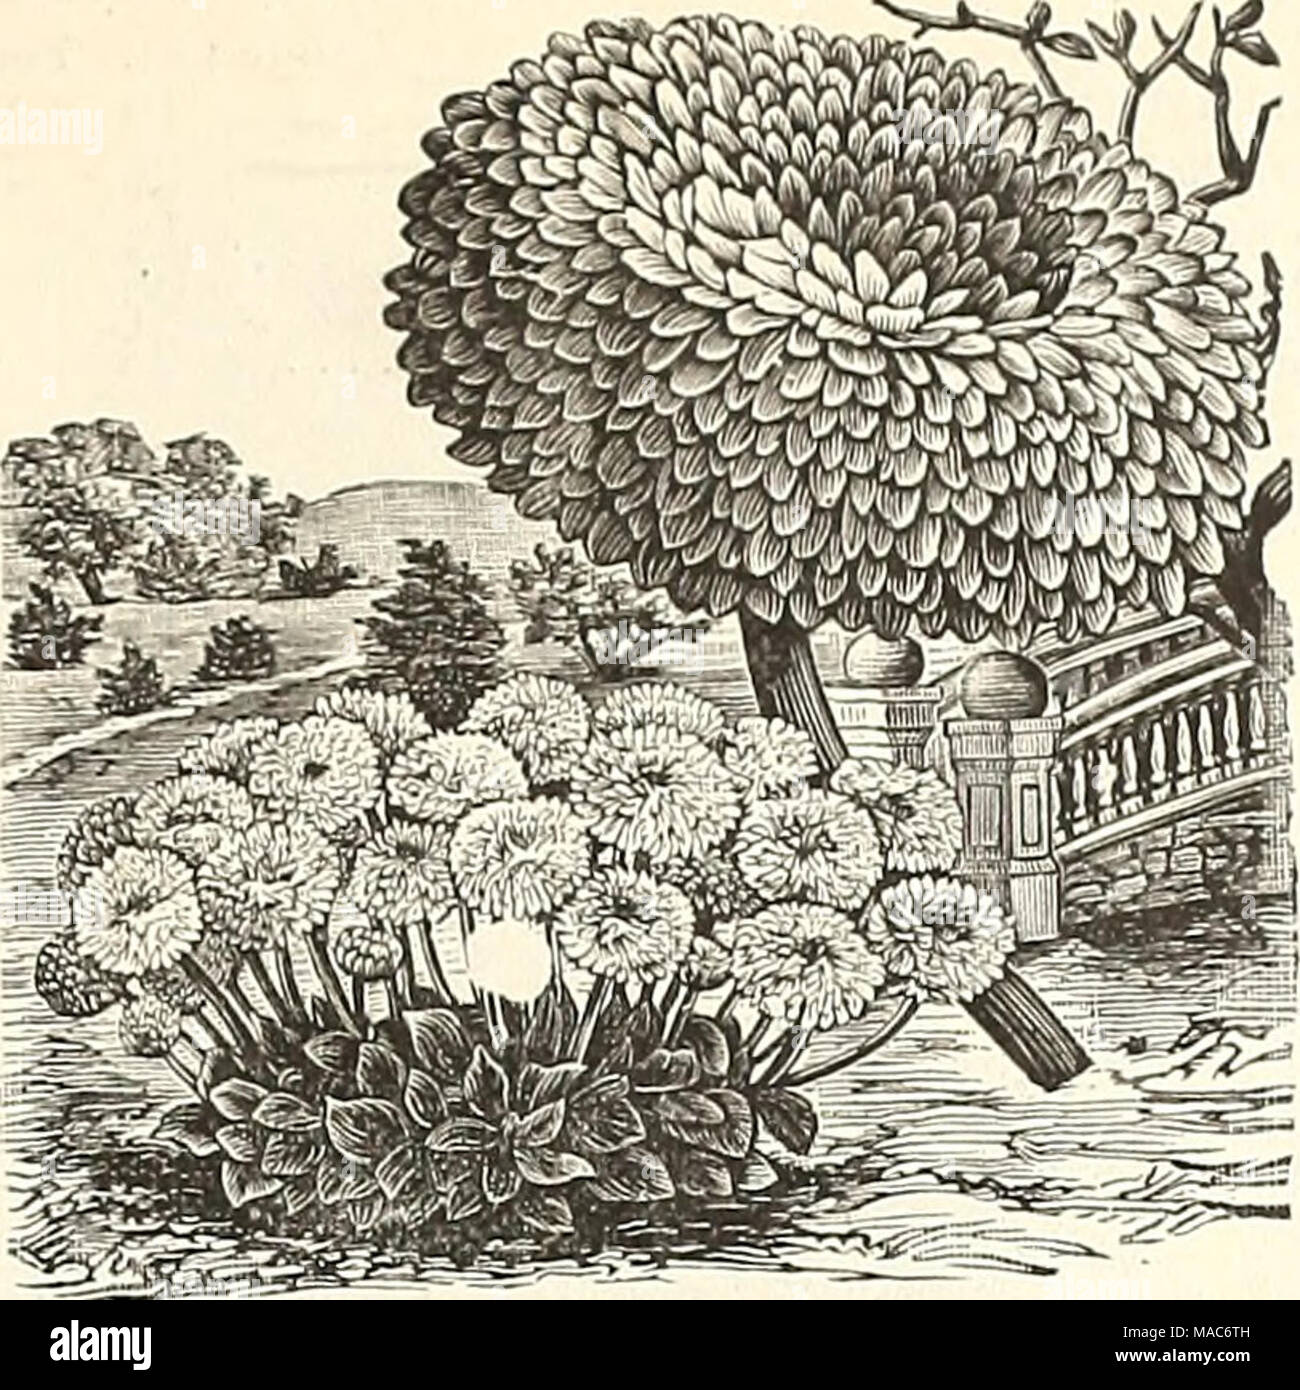 . Dreer's quarterly wholesale price list of seeds, plants, implements, &amp;c. : winter edition, January 1893 March . Double Daisy Snowball. Daisy, Half pkt. 30 Tr. pkt. 50 50 50 50 50 10 30 75 15 10 25 &quot; Longfellow''. Snowball, new white... 30 '' Extra Double White 30 &quot; Extra DoubleMixed 30 &quot; New Quilled, mixed 30 Eschscholtzia, mixed , Feverfew, Double White Fuchsia, mixed, single and double... i trade pkt., 45 cts. Forget-me-not, (see BIyosotis) Gaillardia picta Lorenziana &quot; mixed grandiflora, new apple scented (true), per 100 seeds, 40c.; 1000 seeds, |2.50. '' Zonale, c Stock Photo